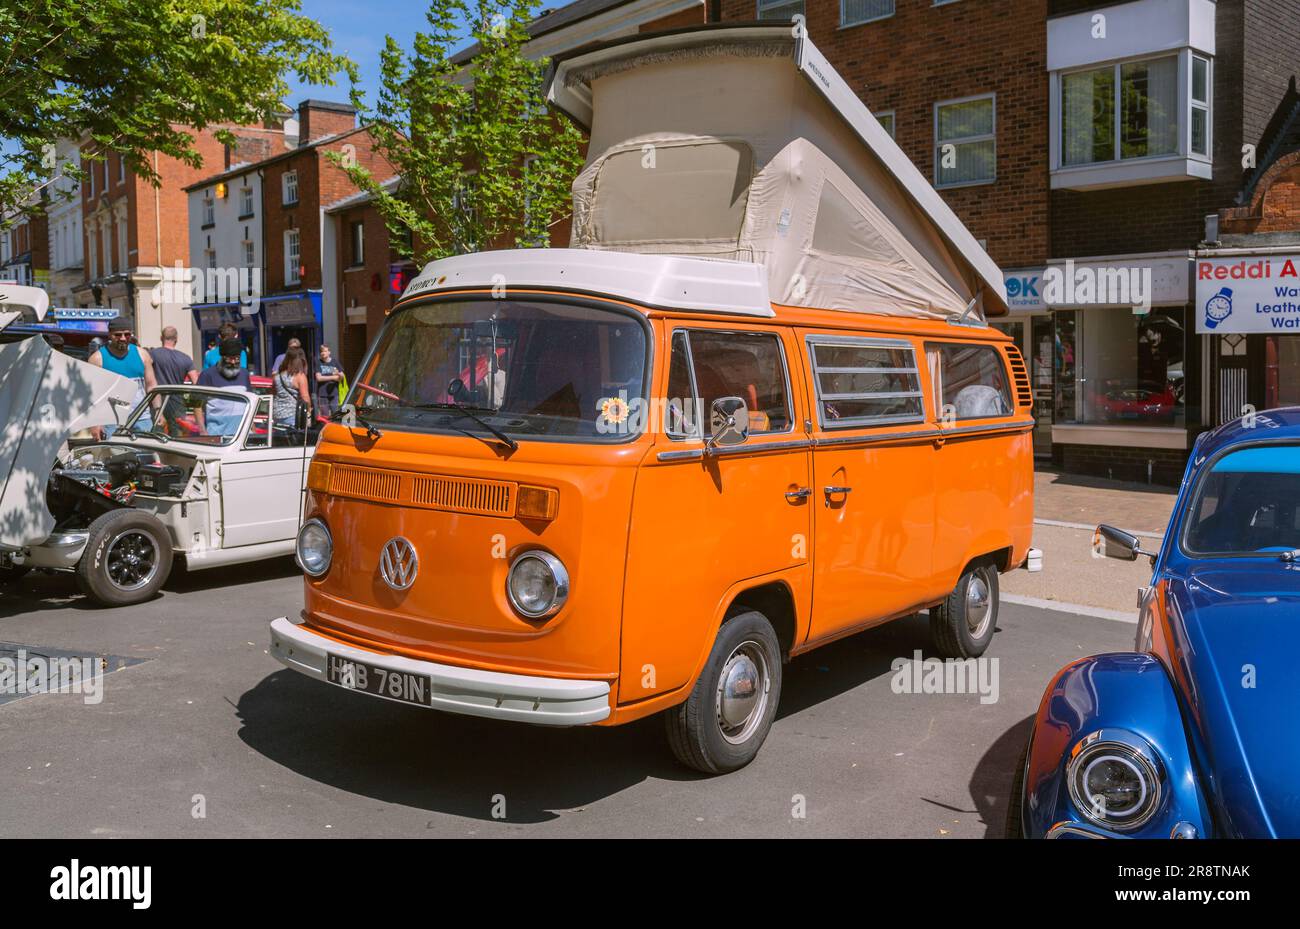 An orange 1970s Volkswagen camper van with its elevating roof raised up. VW camper van at classic and vintage car show. Stock Photo